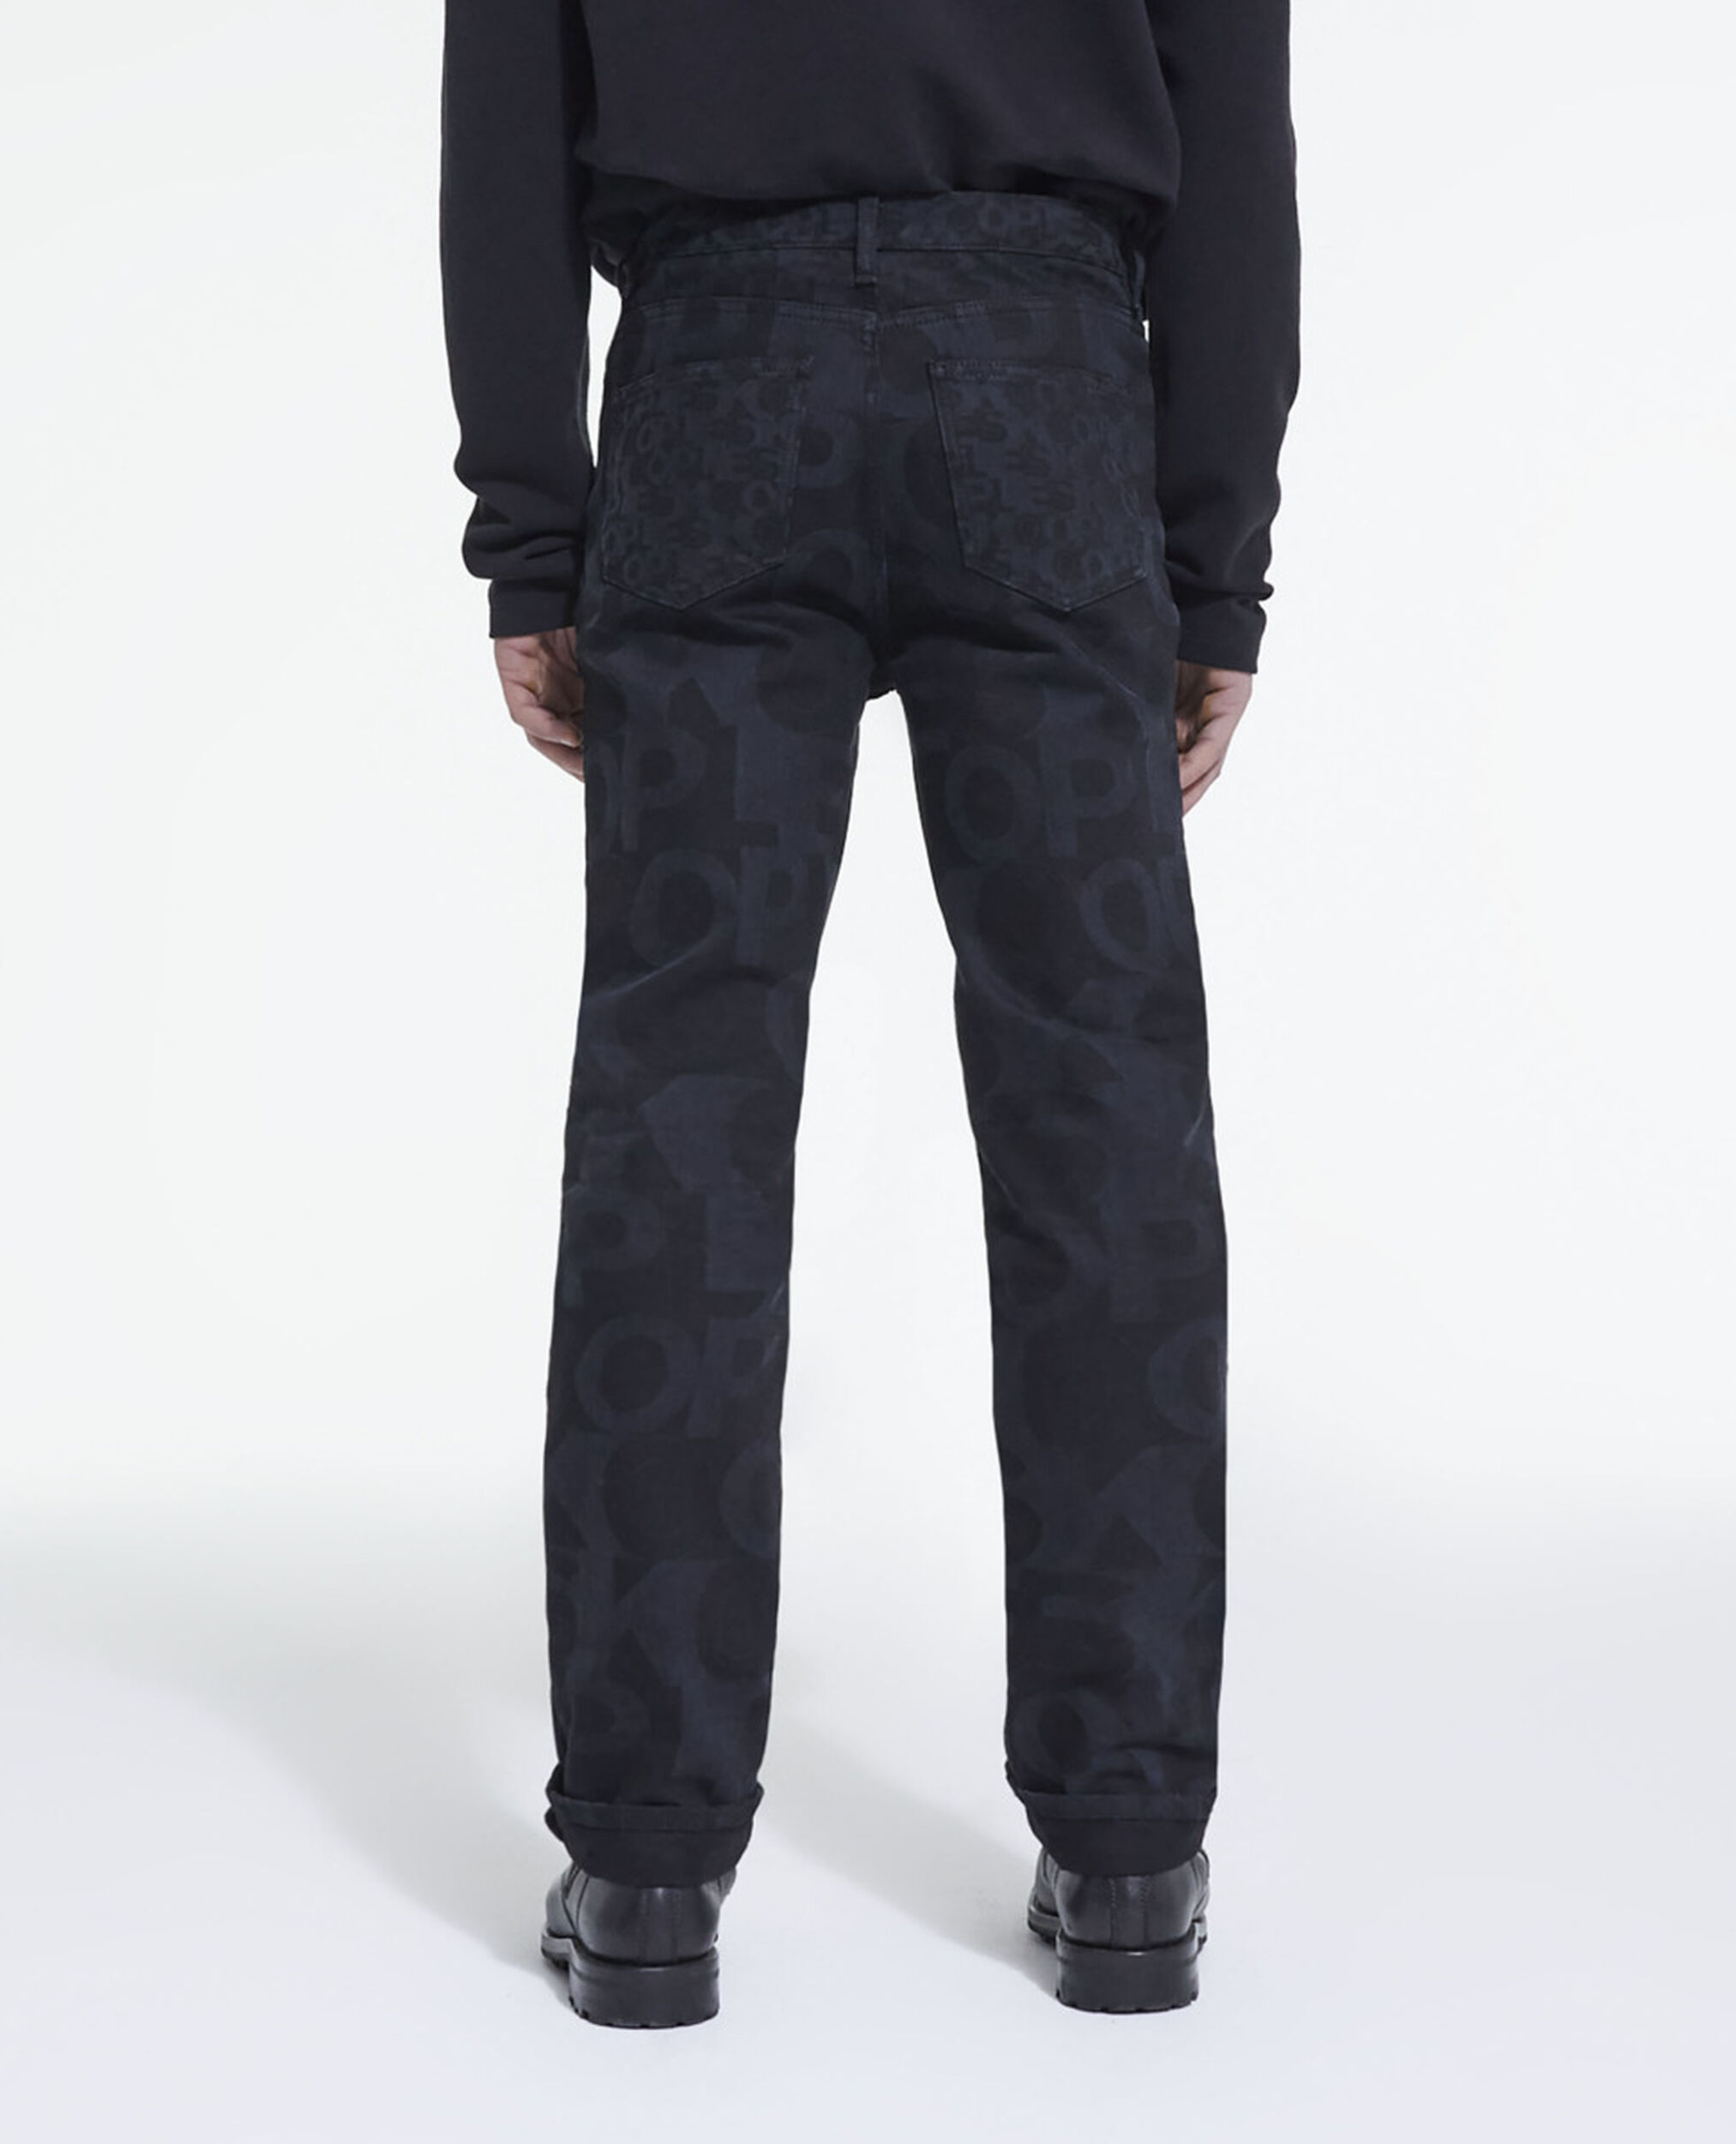 Straight-cut jeans with The Kooples logo, BLACK WASHED, hi-res image number null